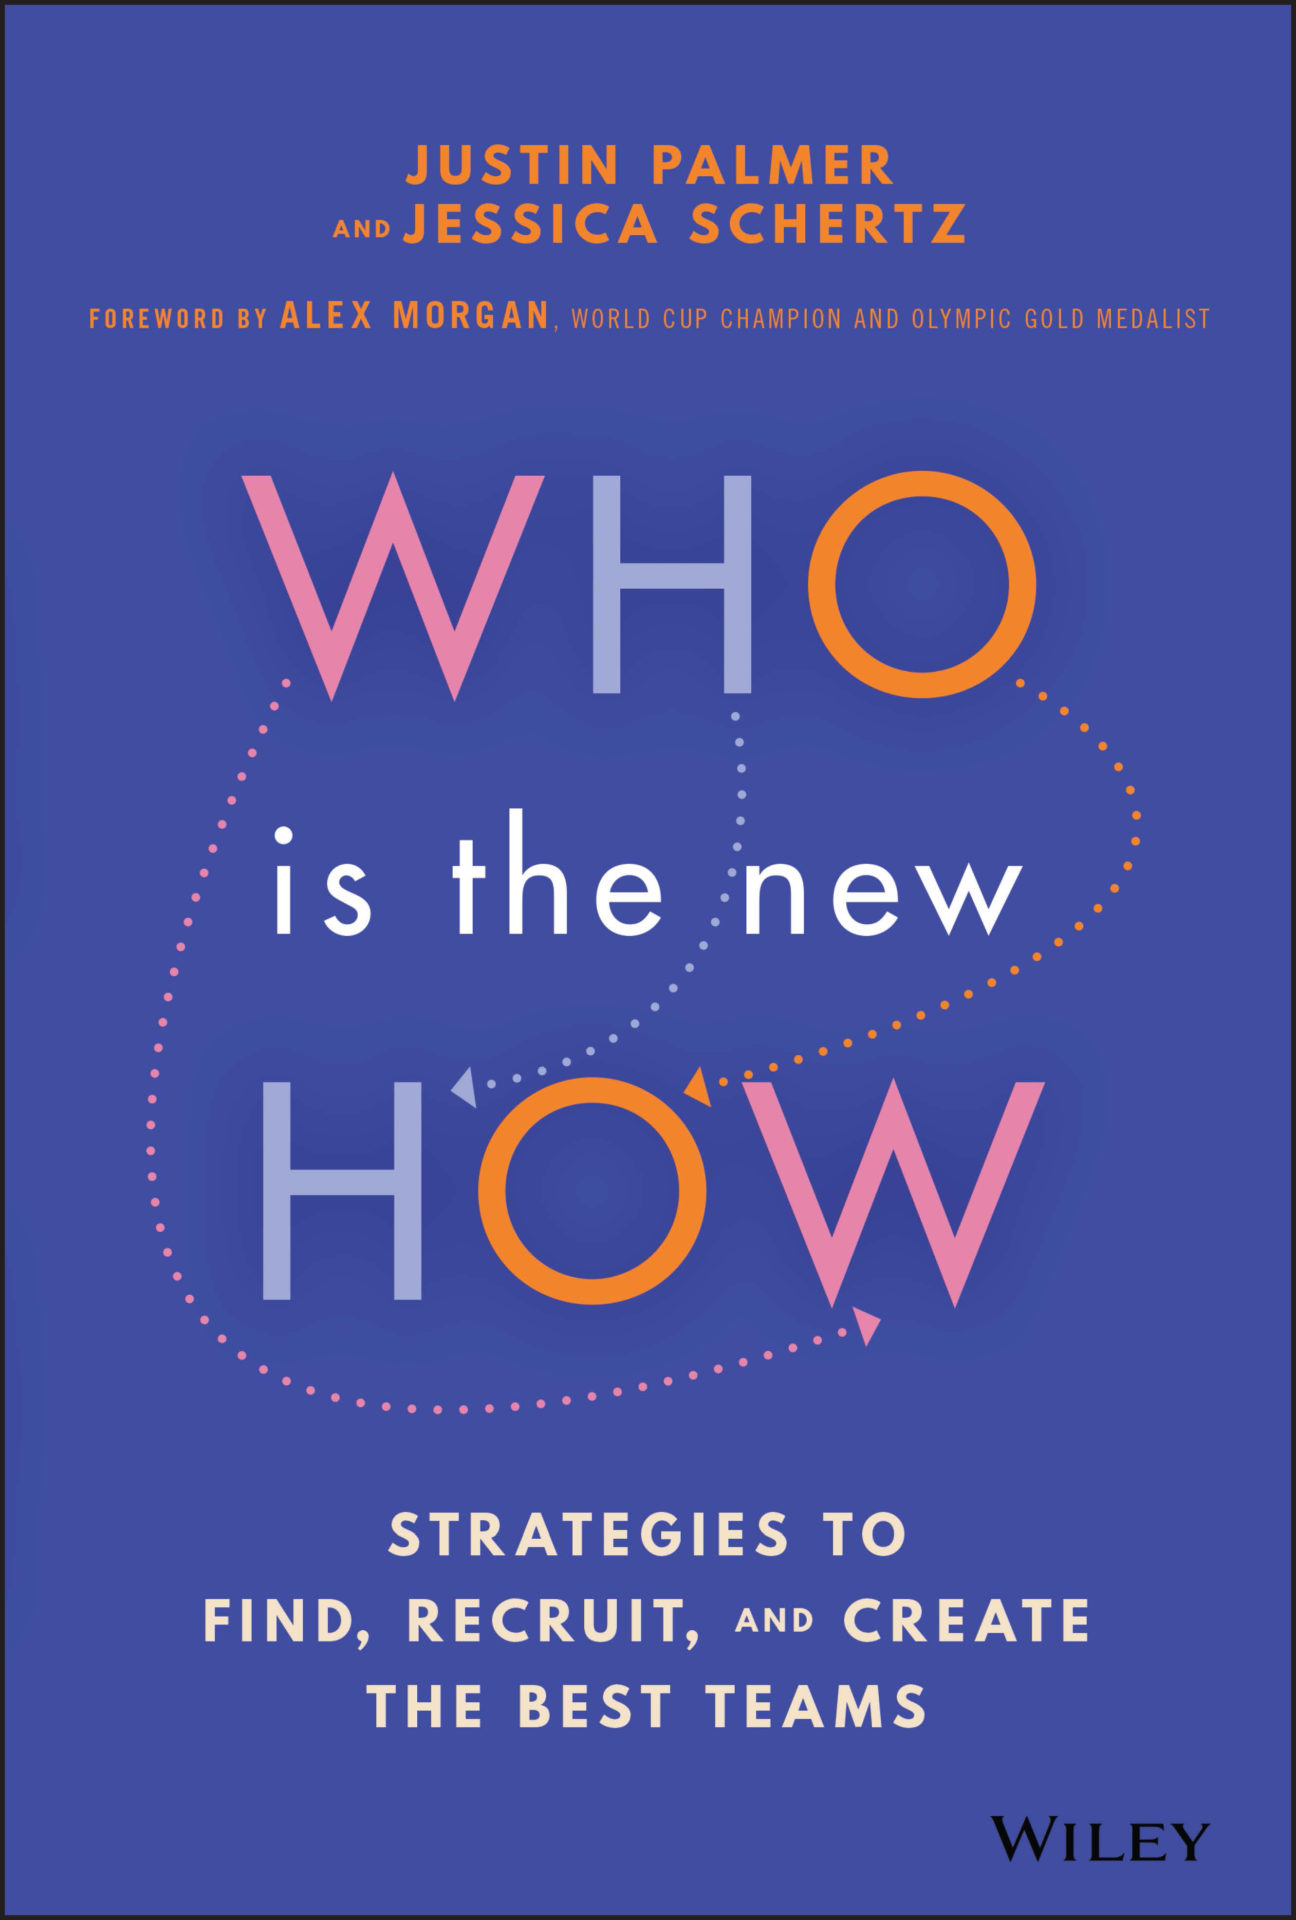 Who Is the New How in the AMBA Book Club